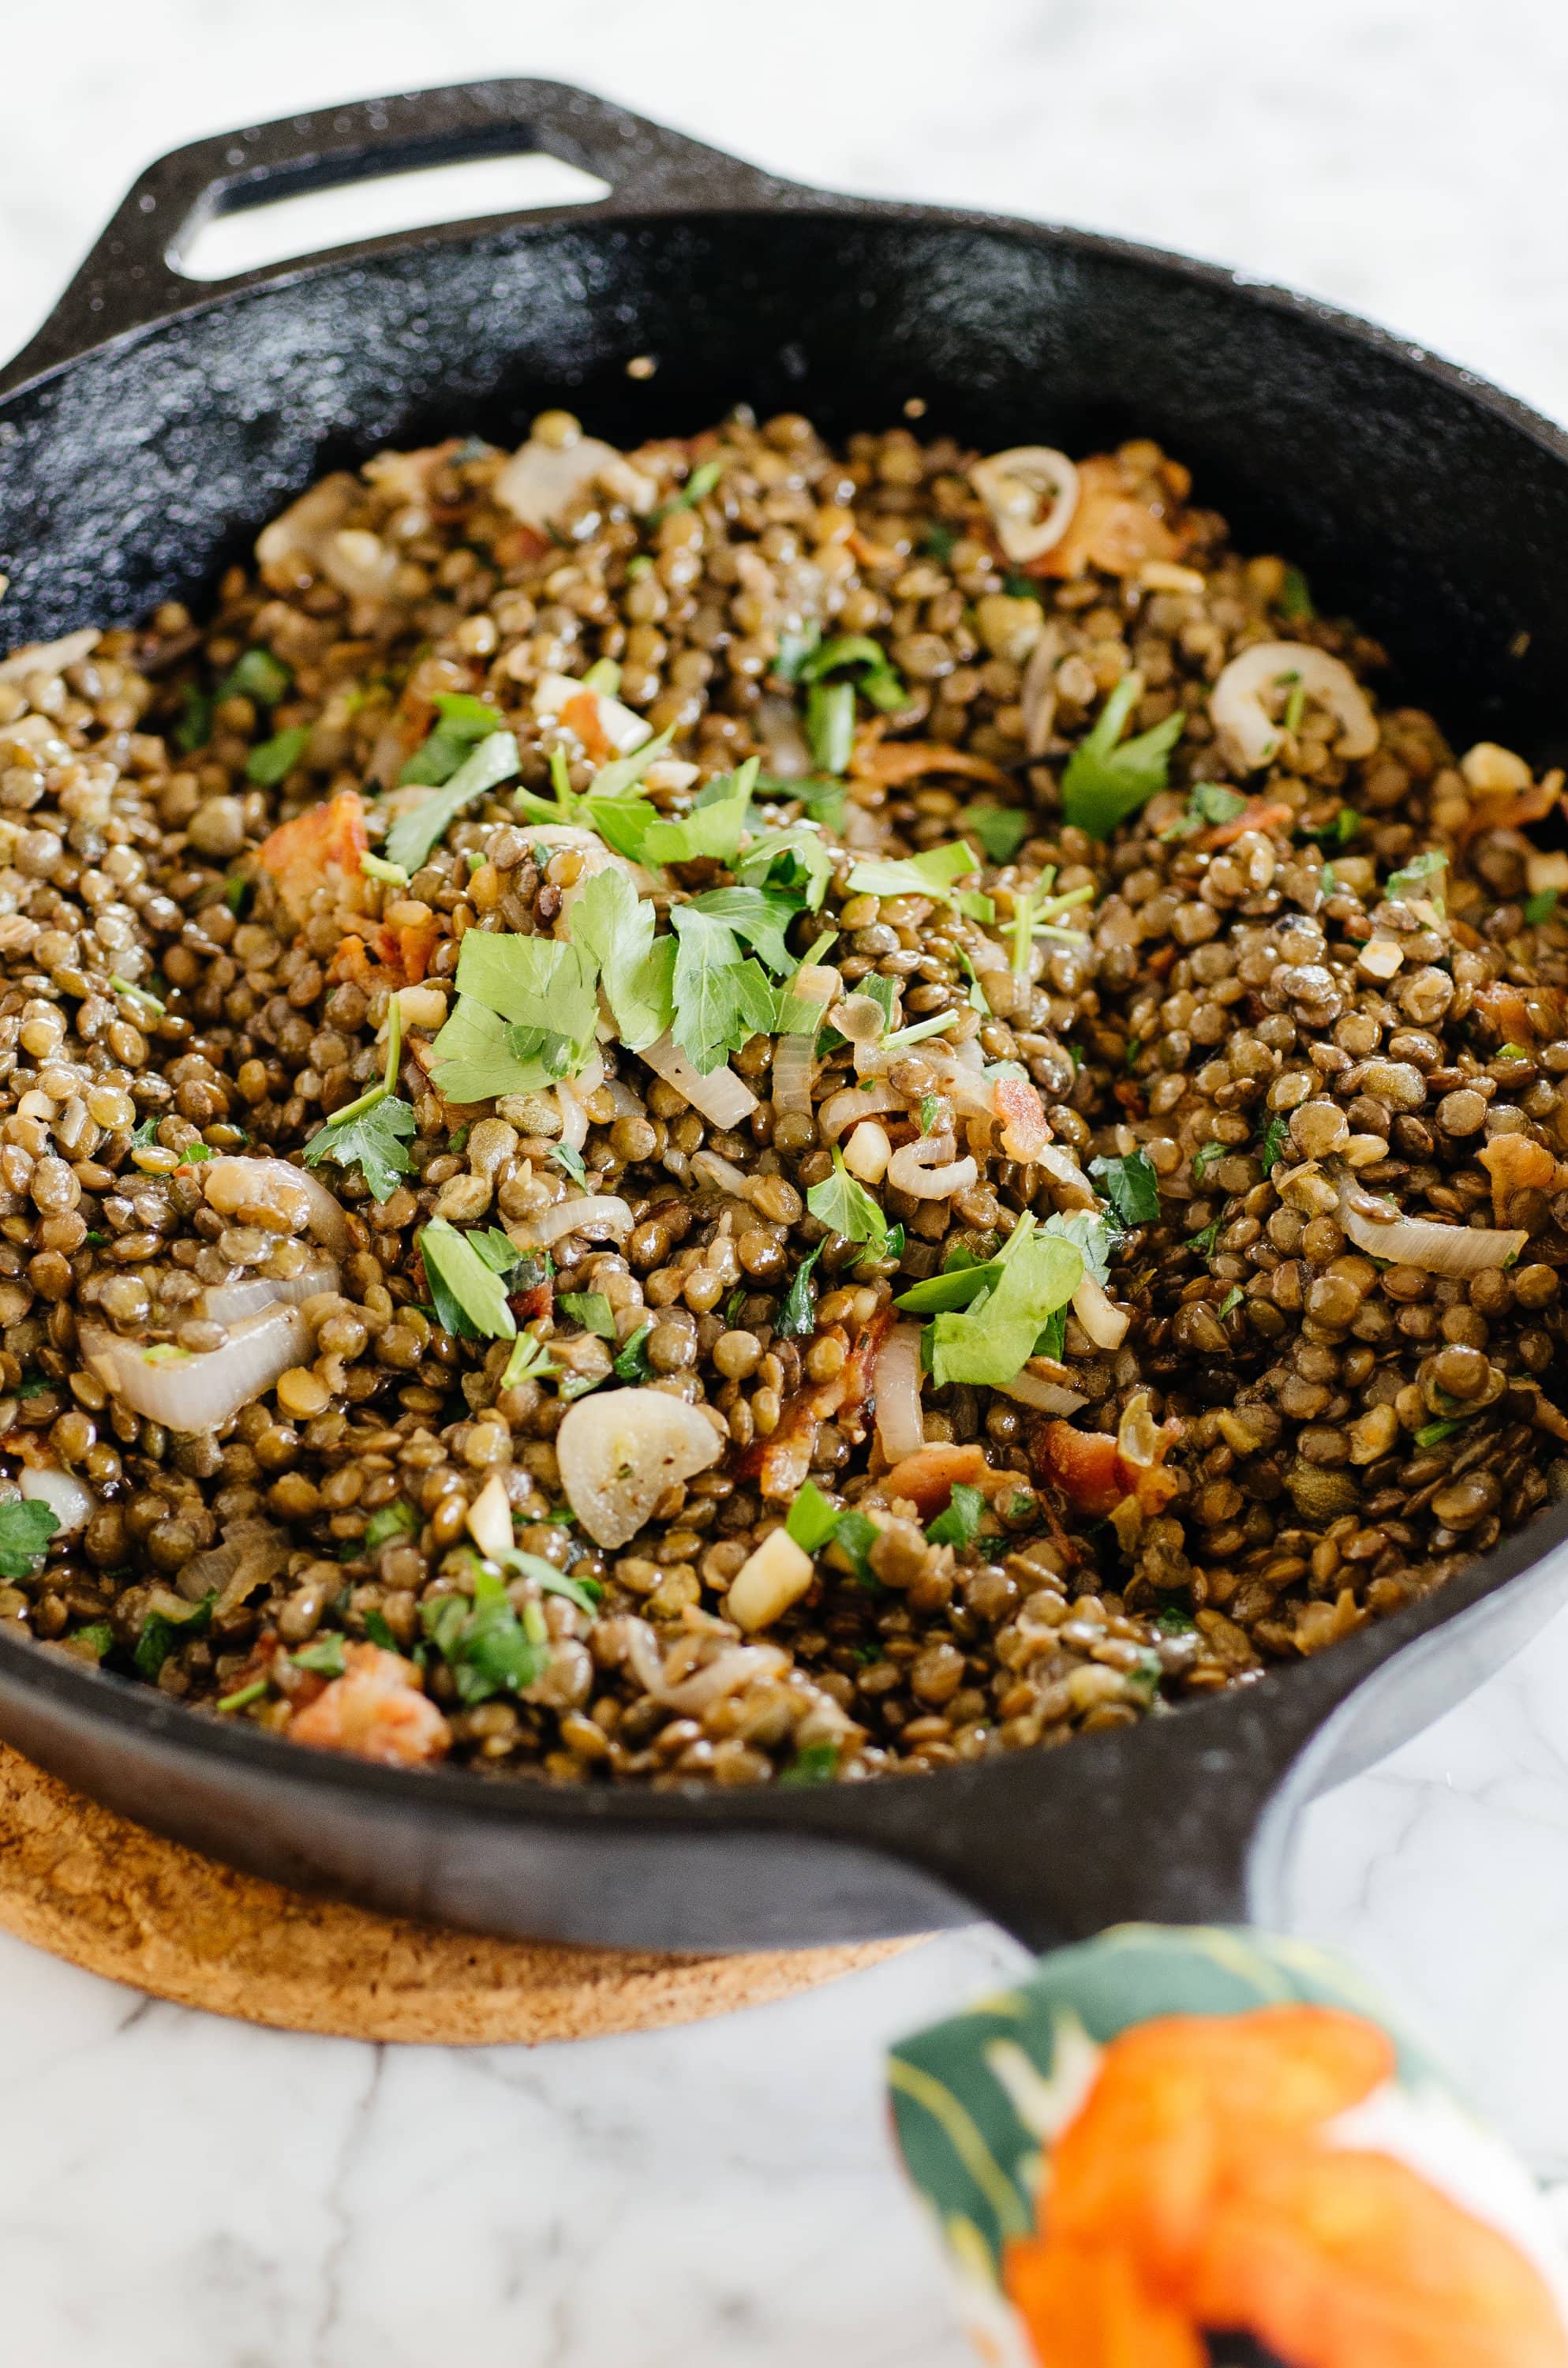 Recipe: Warm French Lentil Salad with Bacon & Herbs | Kitchn